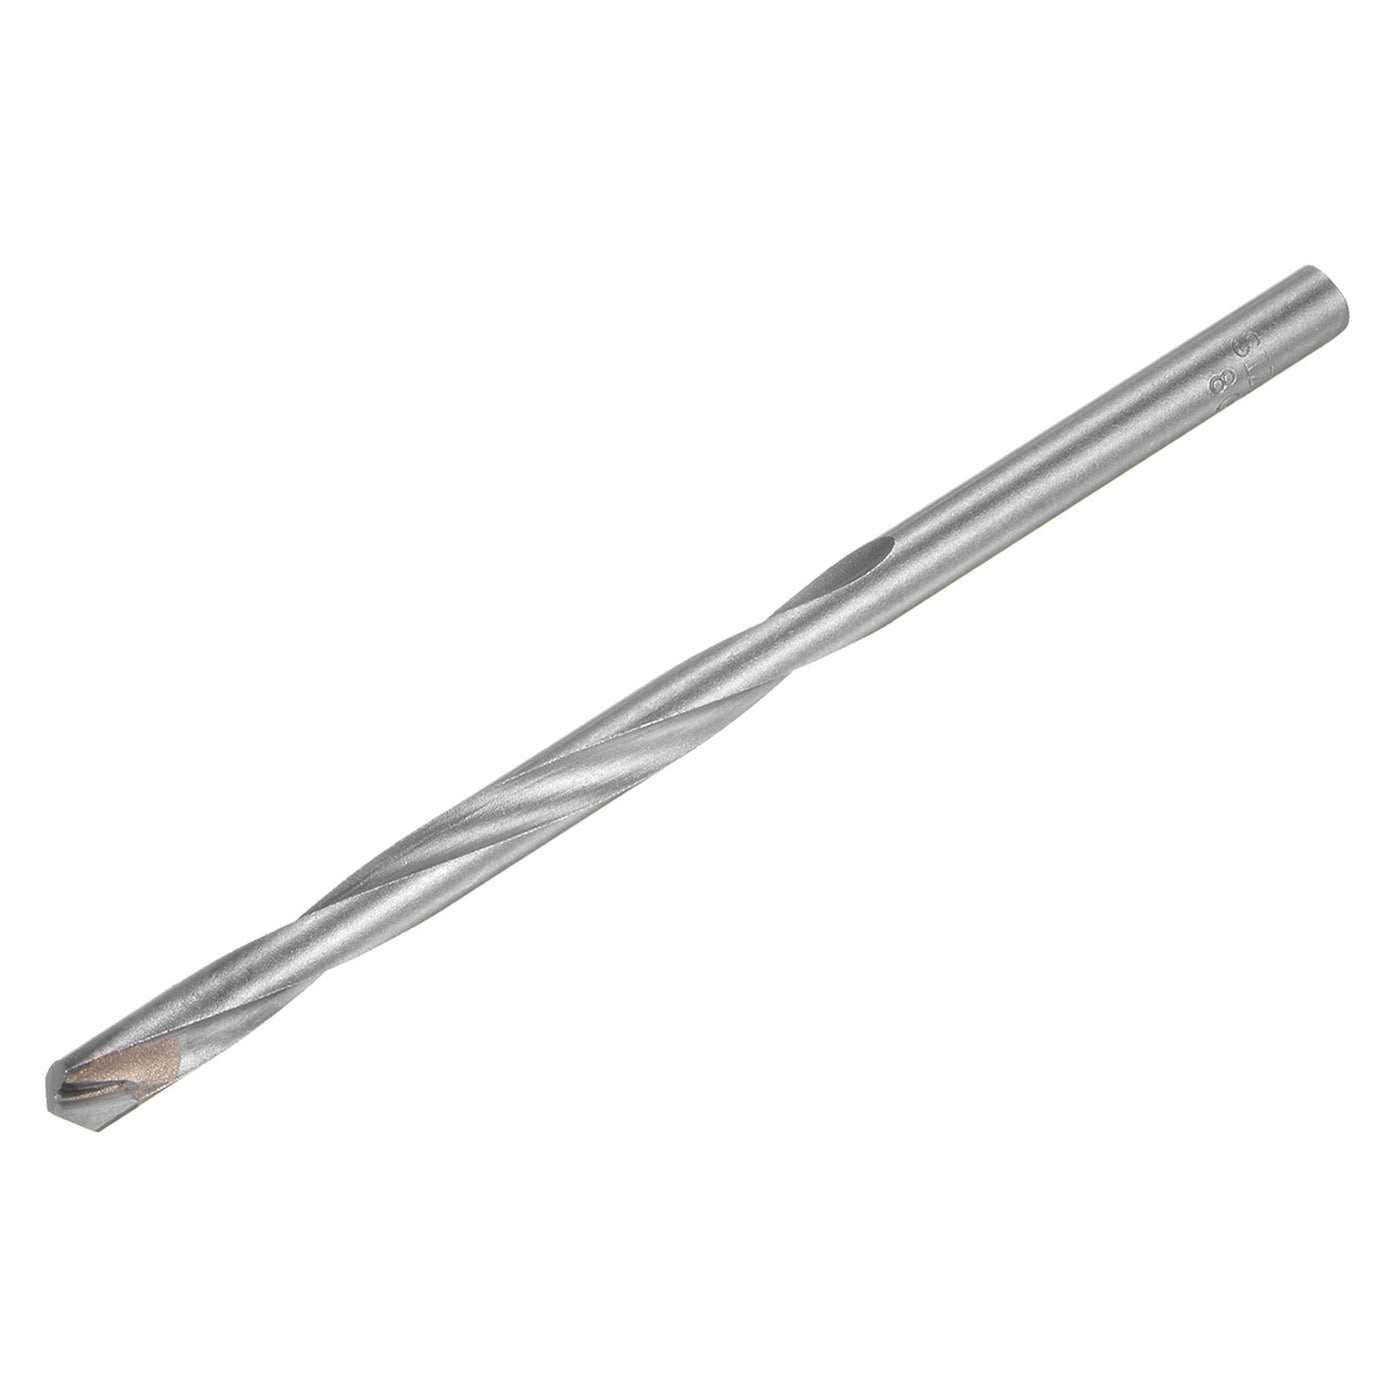 uxcell Uxcell 8mm Cutting Dia Round Shank Cemented Carbide Twist Drill Bit, 150mm Length